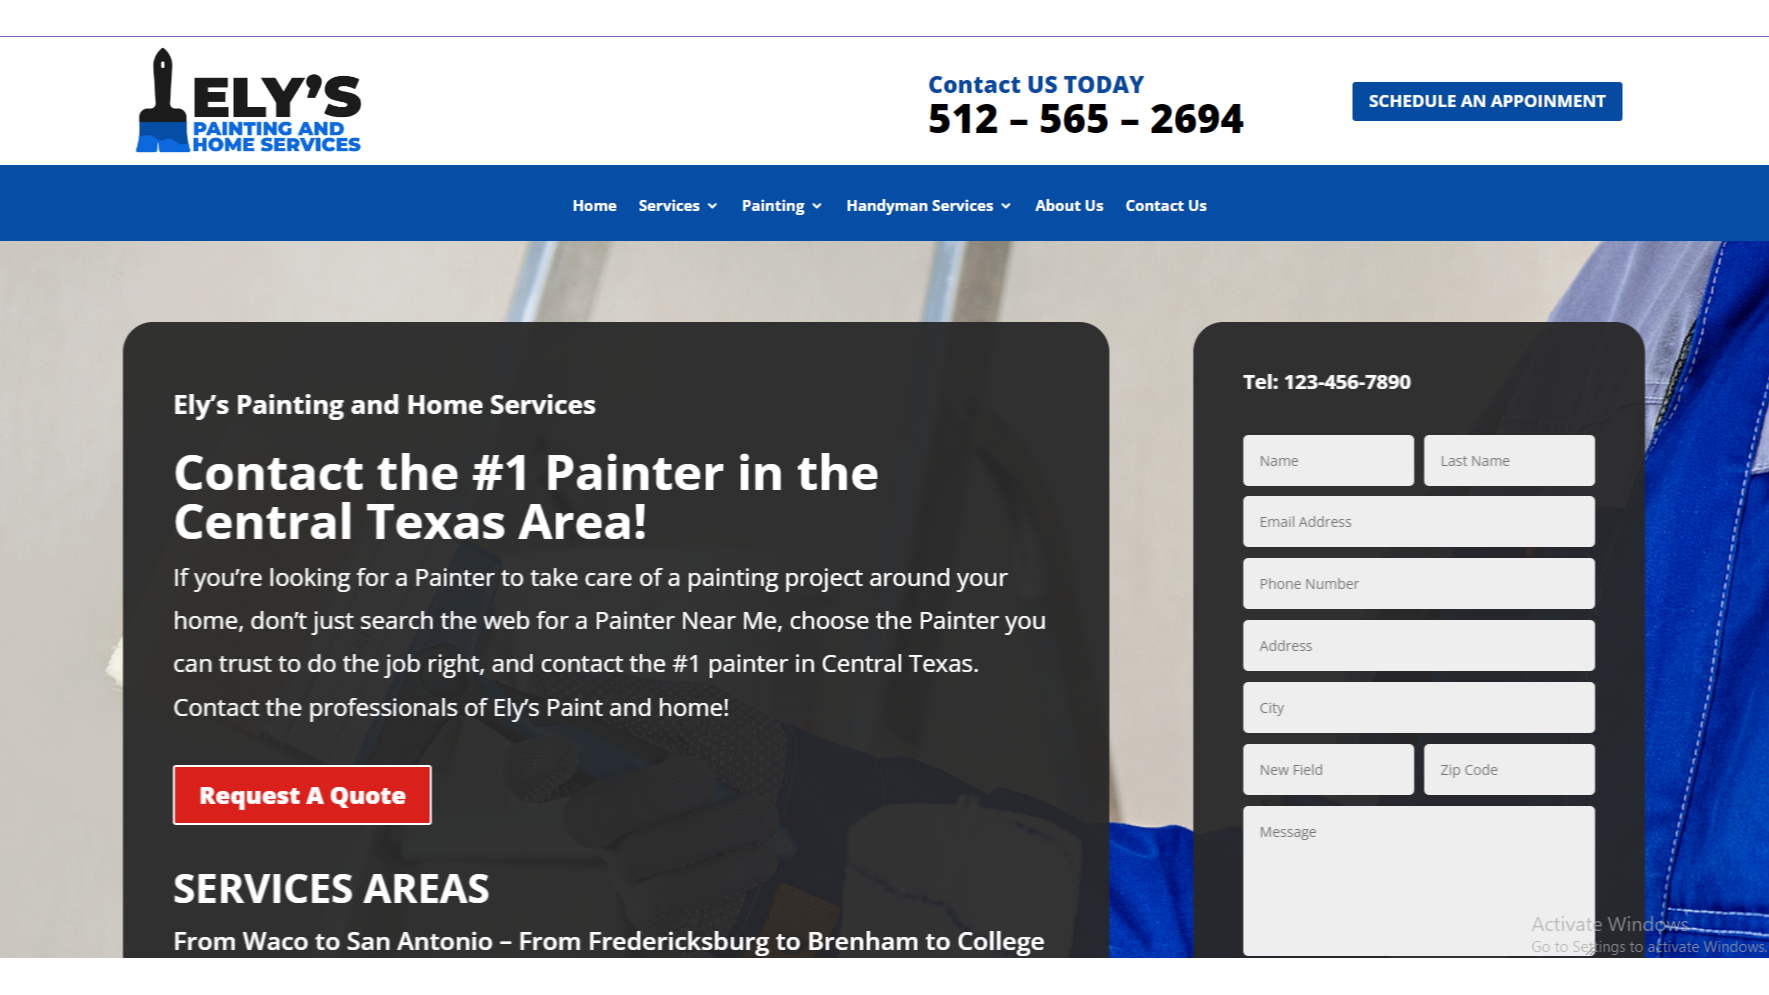 Hire The Best Local Painter & Decorator For Exterior Renovation Jobs In Hutto